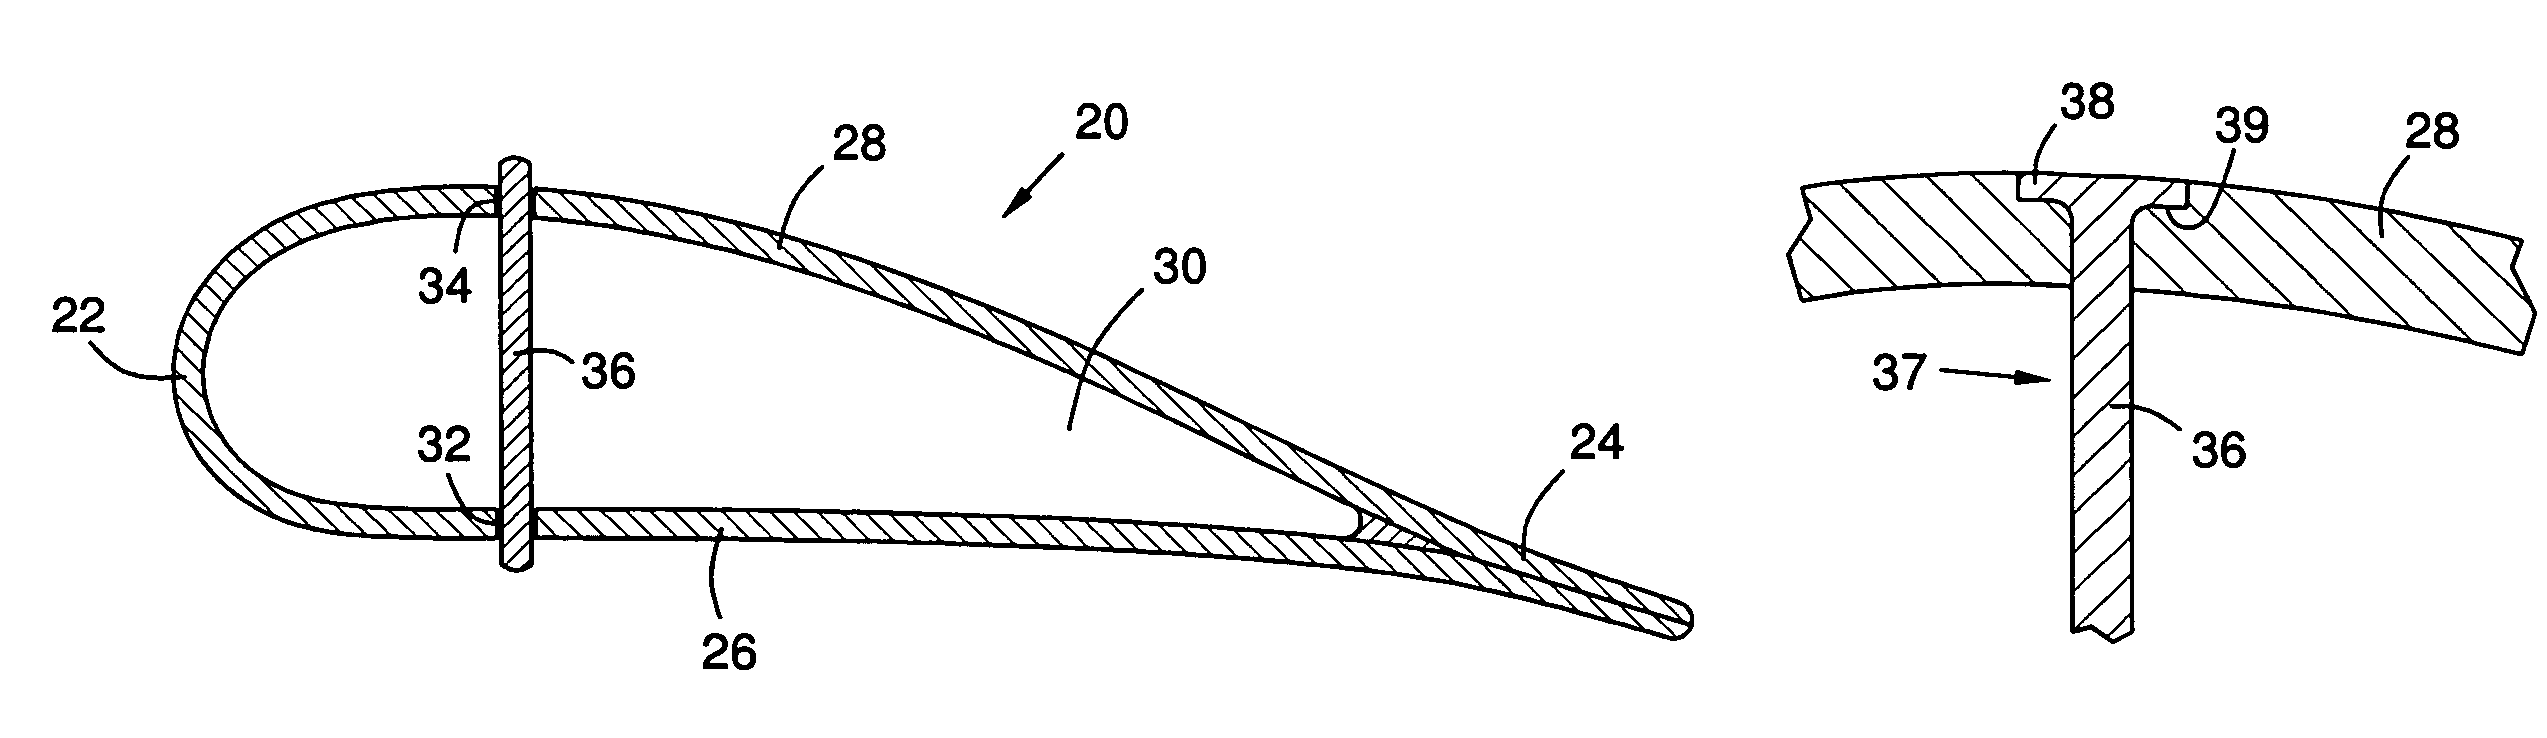 Hollow CMC airfoil with internal stitch